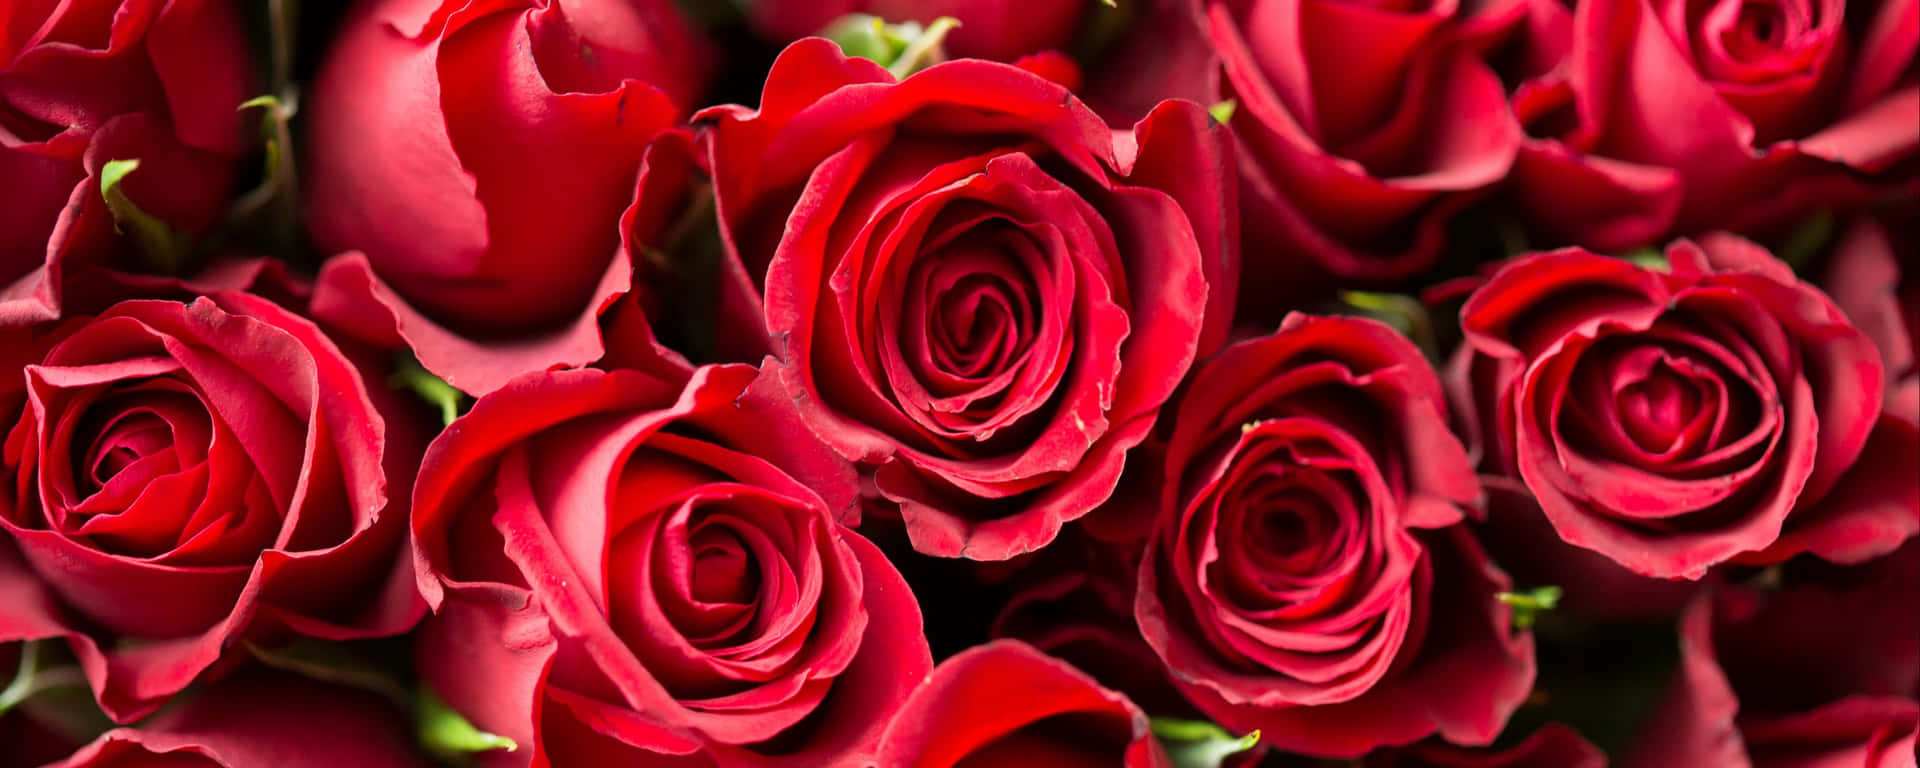 Fragrant Roses Red Ultra Wide Hd Wallpaper